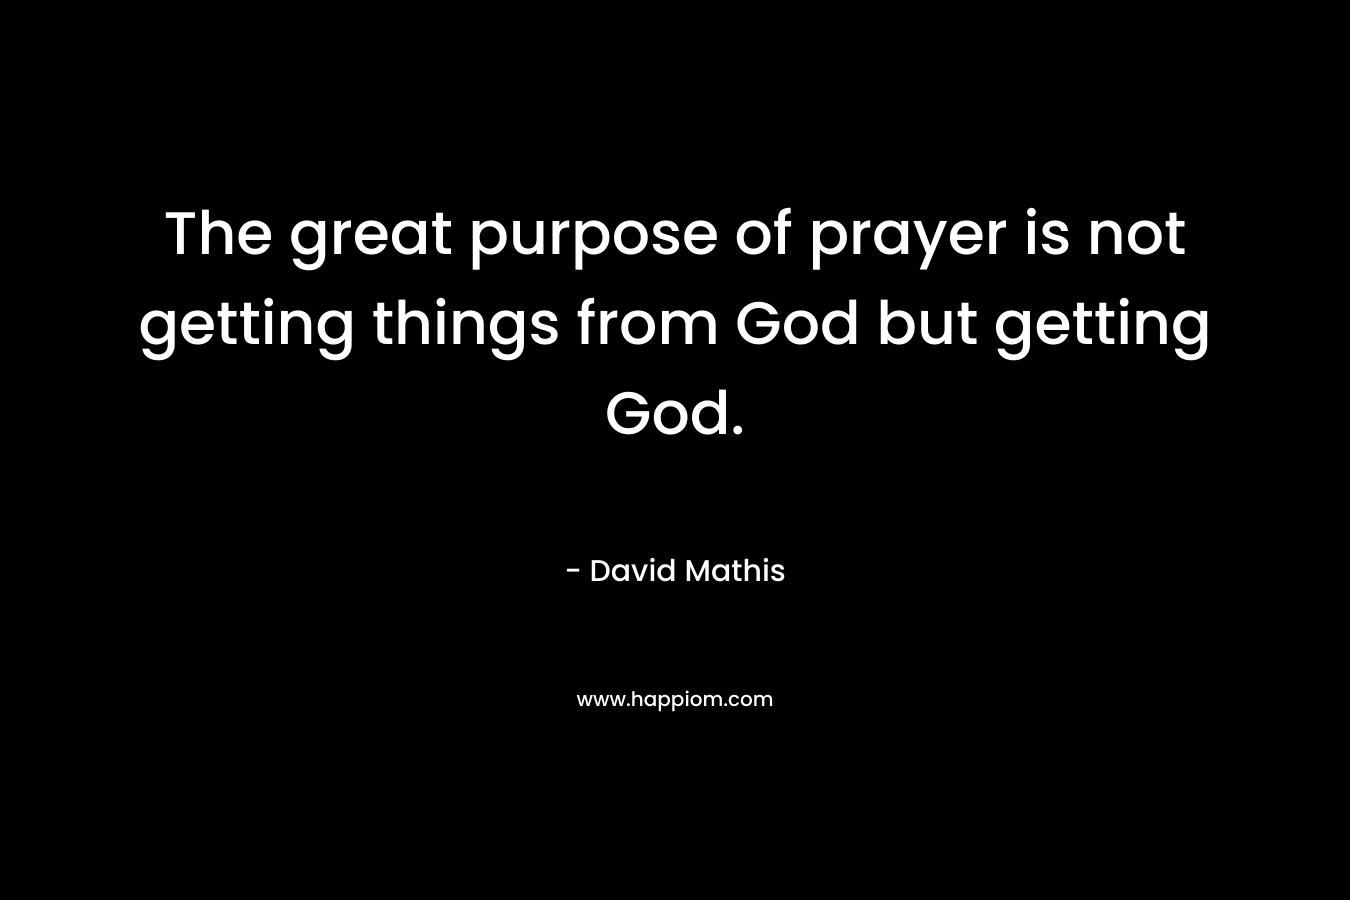 The great purpose of prayer is not getting things from God but getting God. – David Mathis